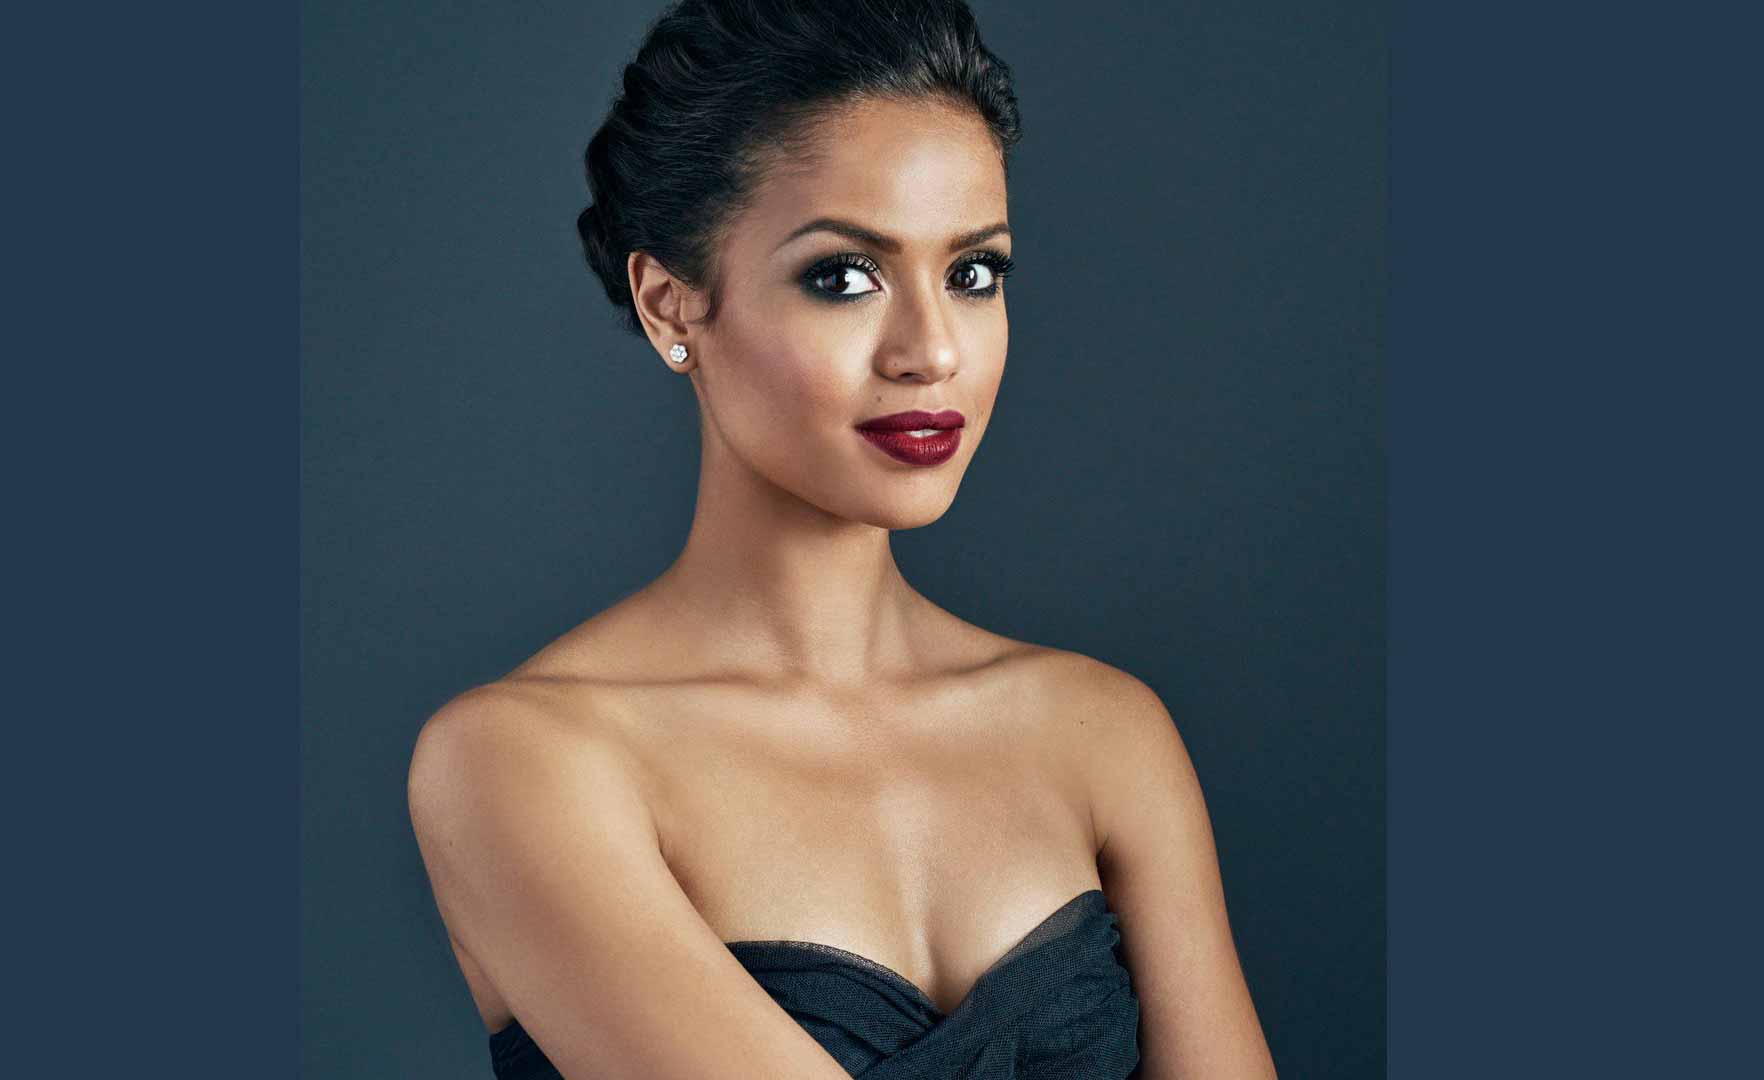 Who is Gugu Mbatha-Raw Boyfriend? Know Her Parents And Family Life